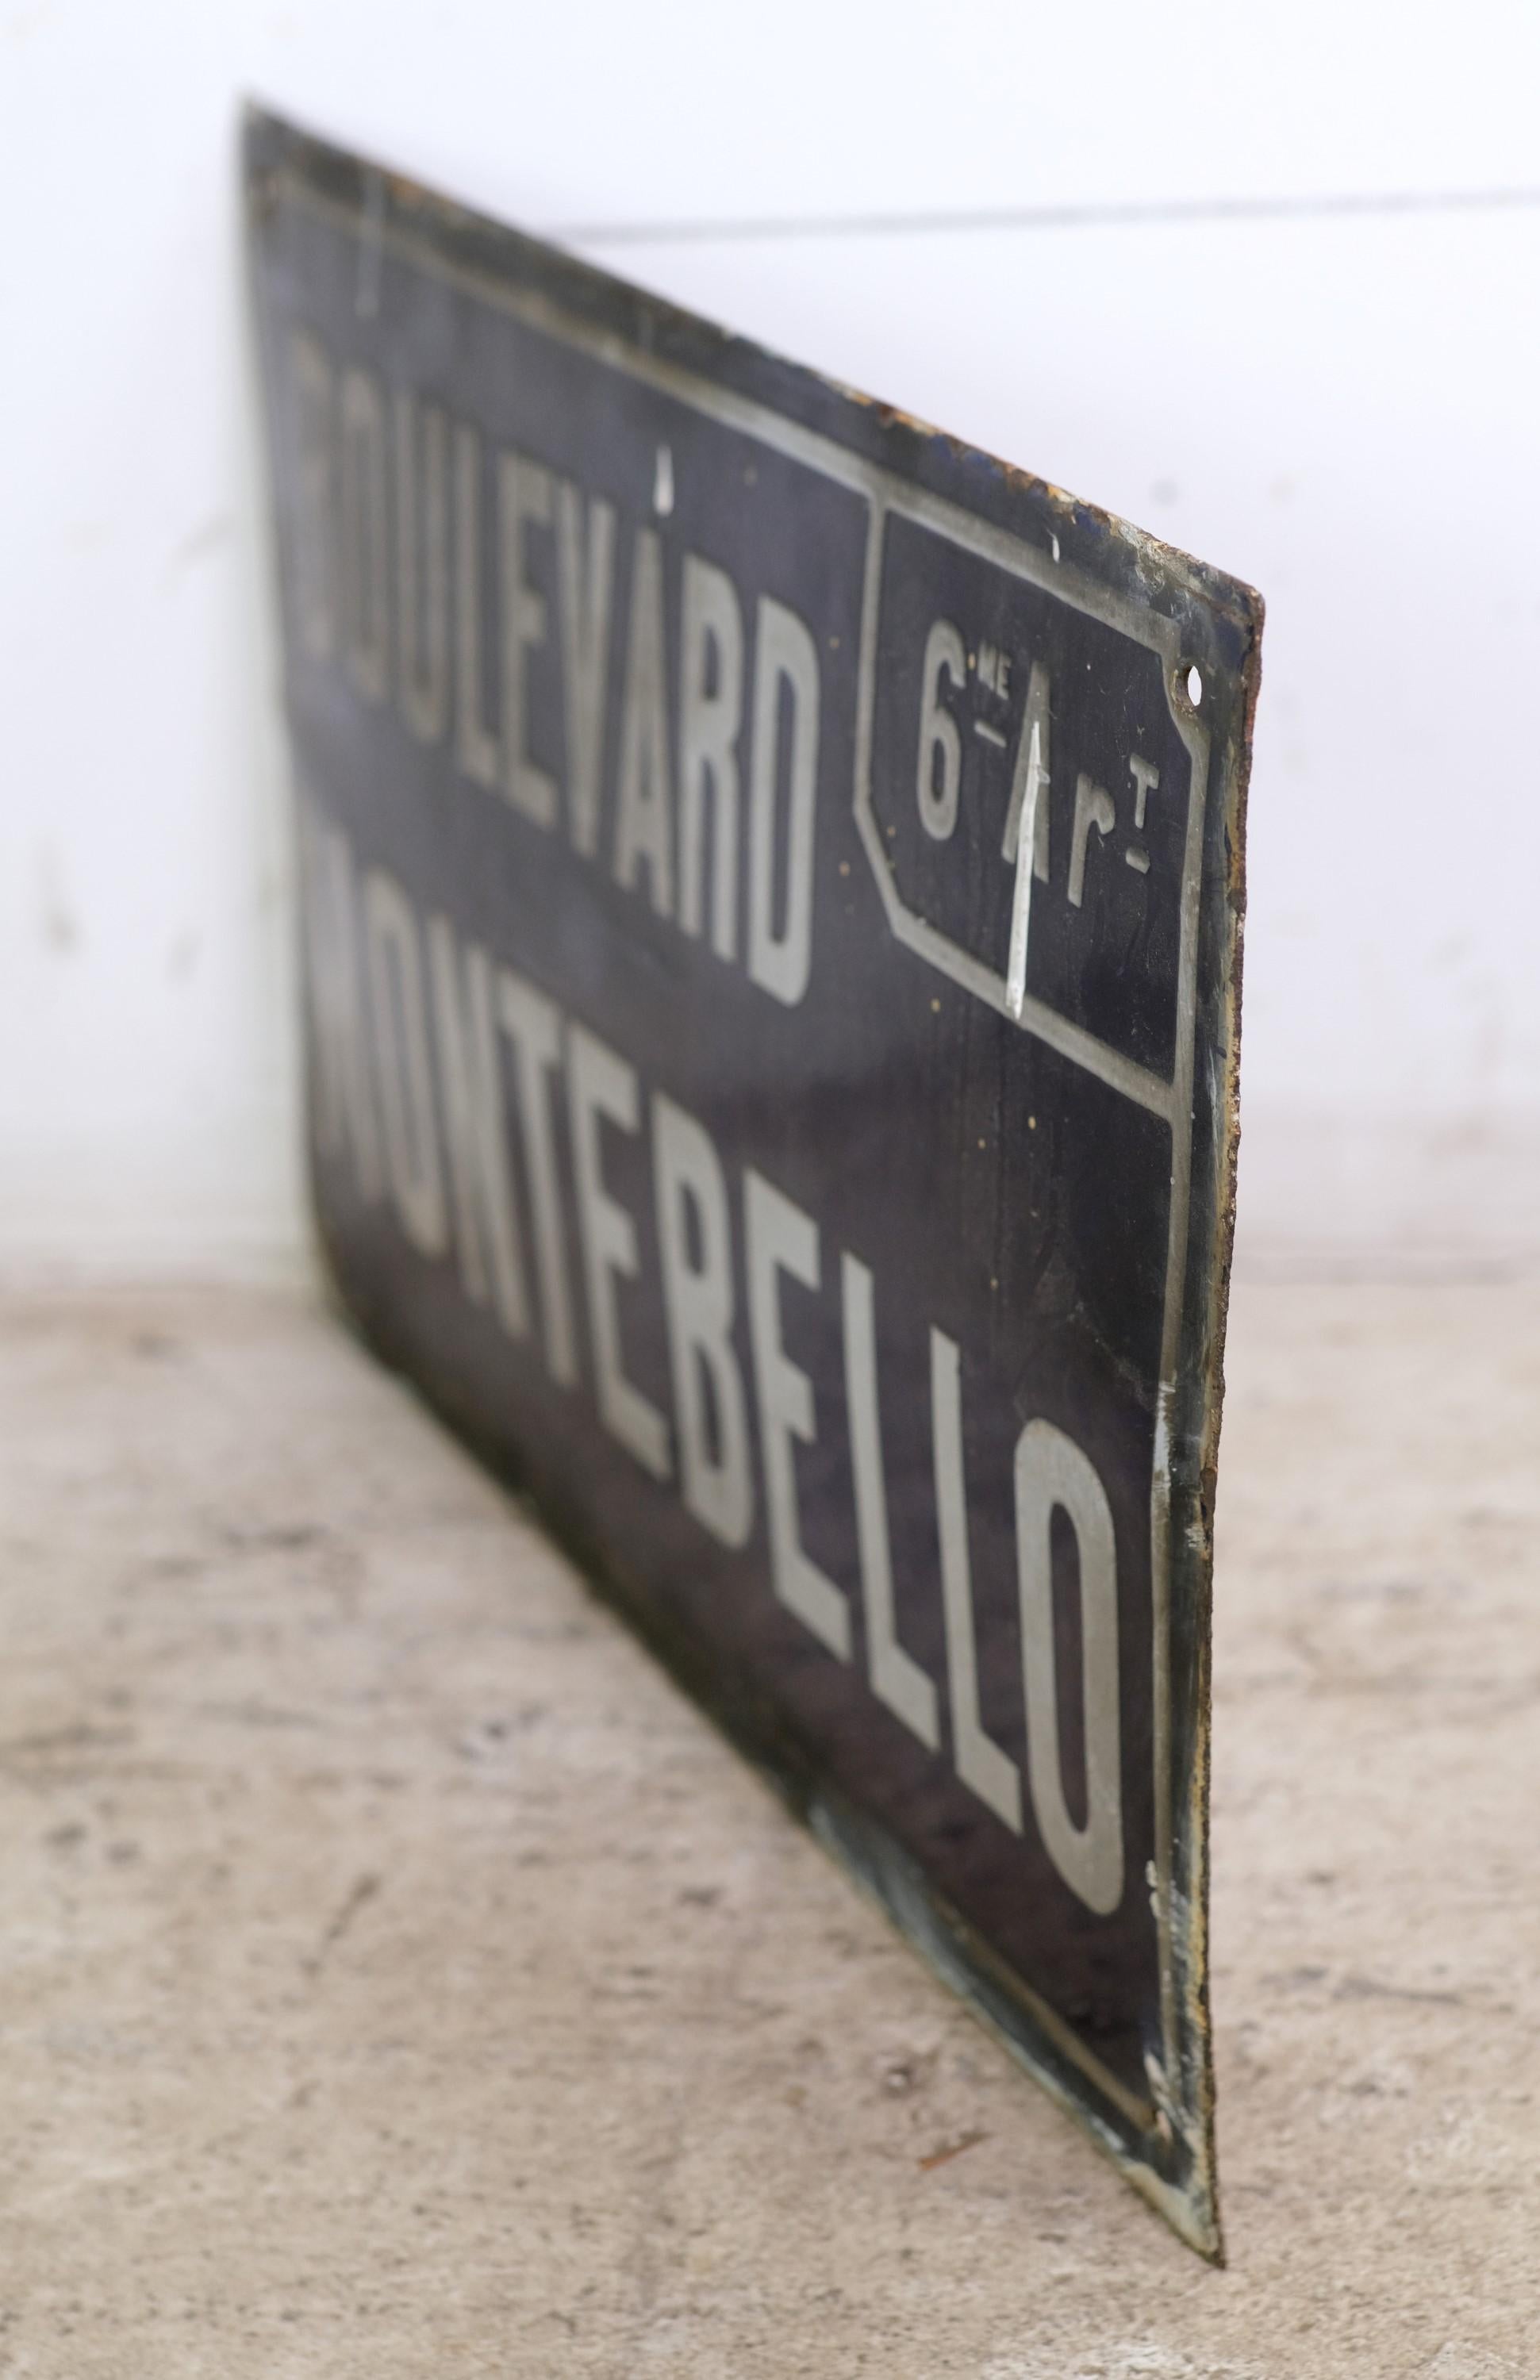 Industrial French Boulevard Montebello Steel Street Sign Enameled Blue and White